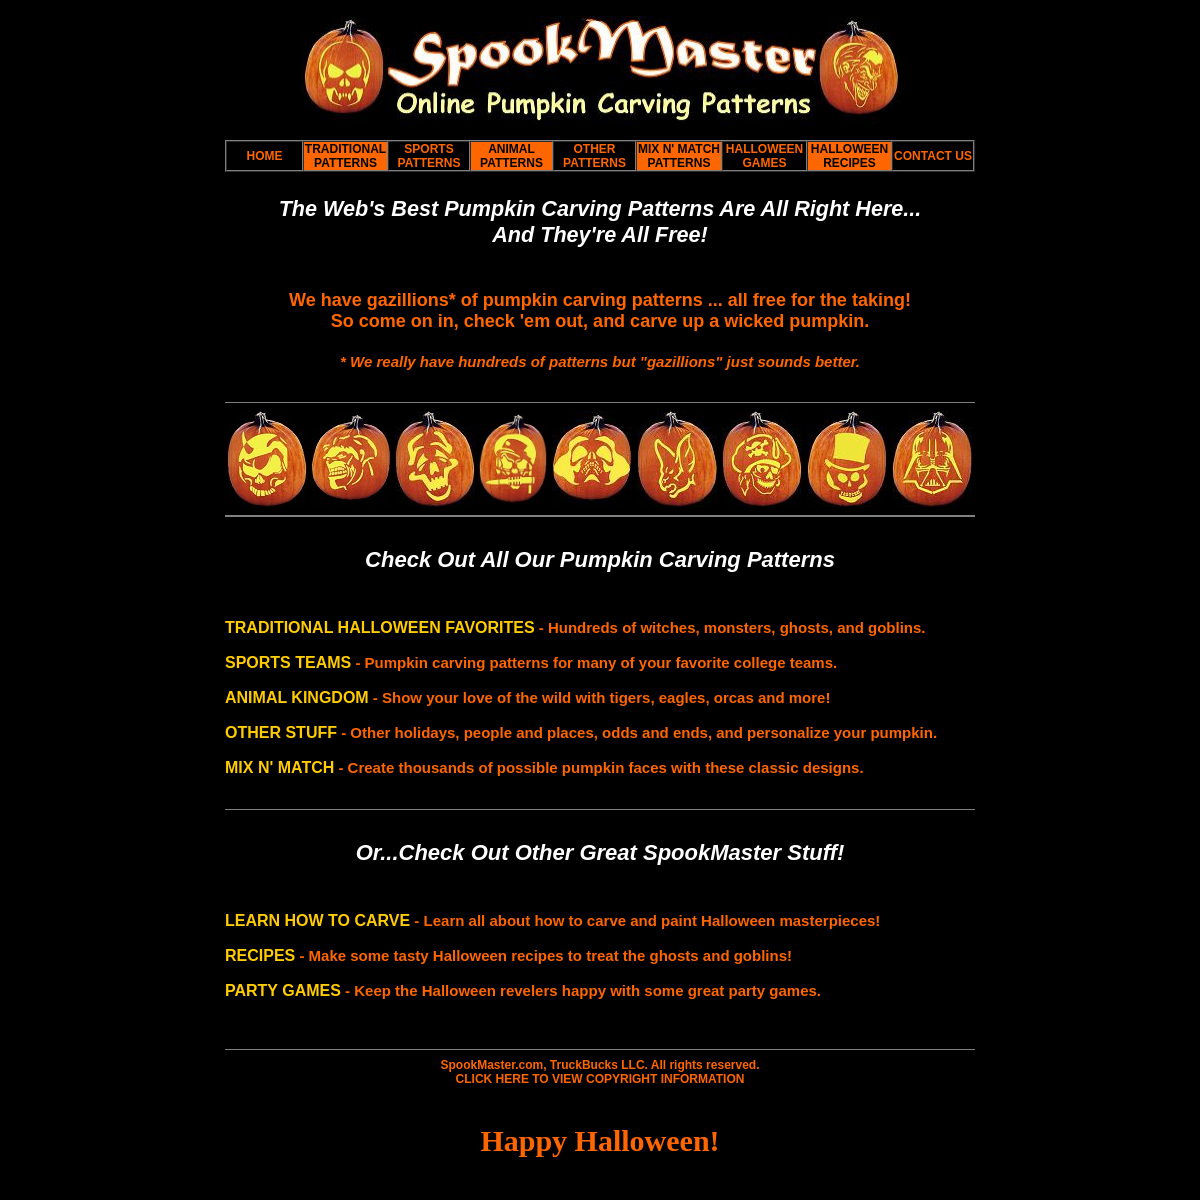 A complete backup of spookmaster.com